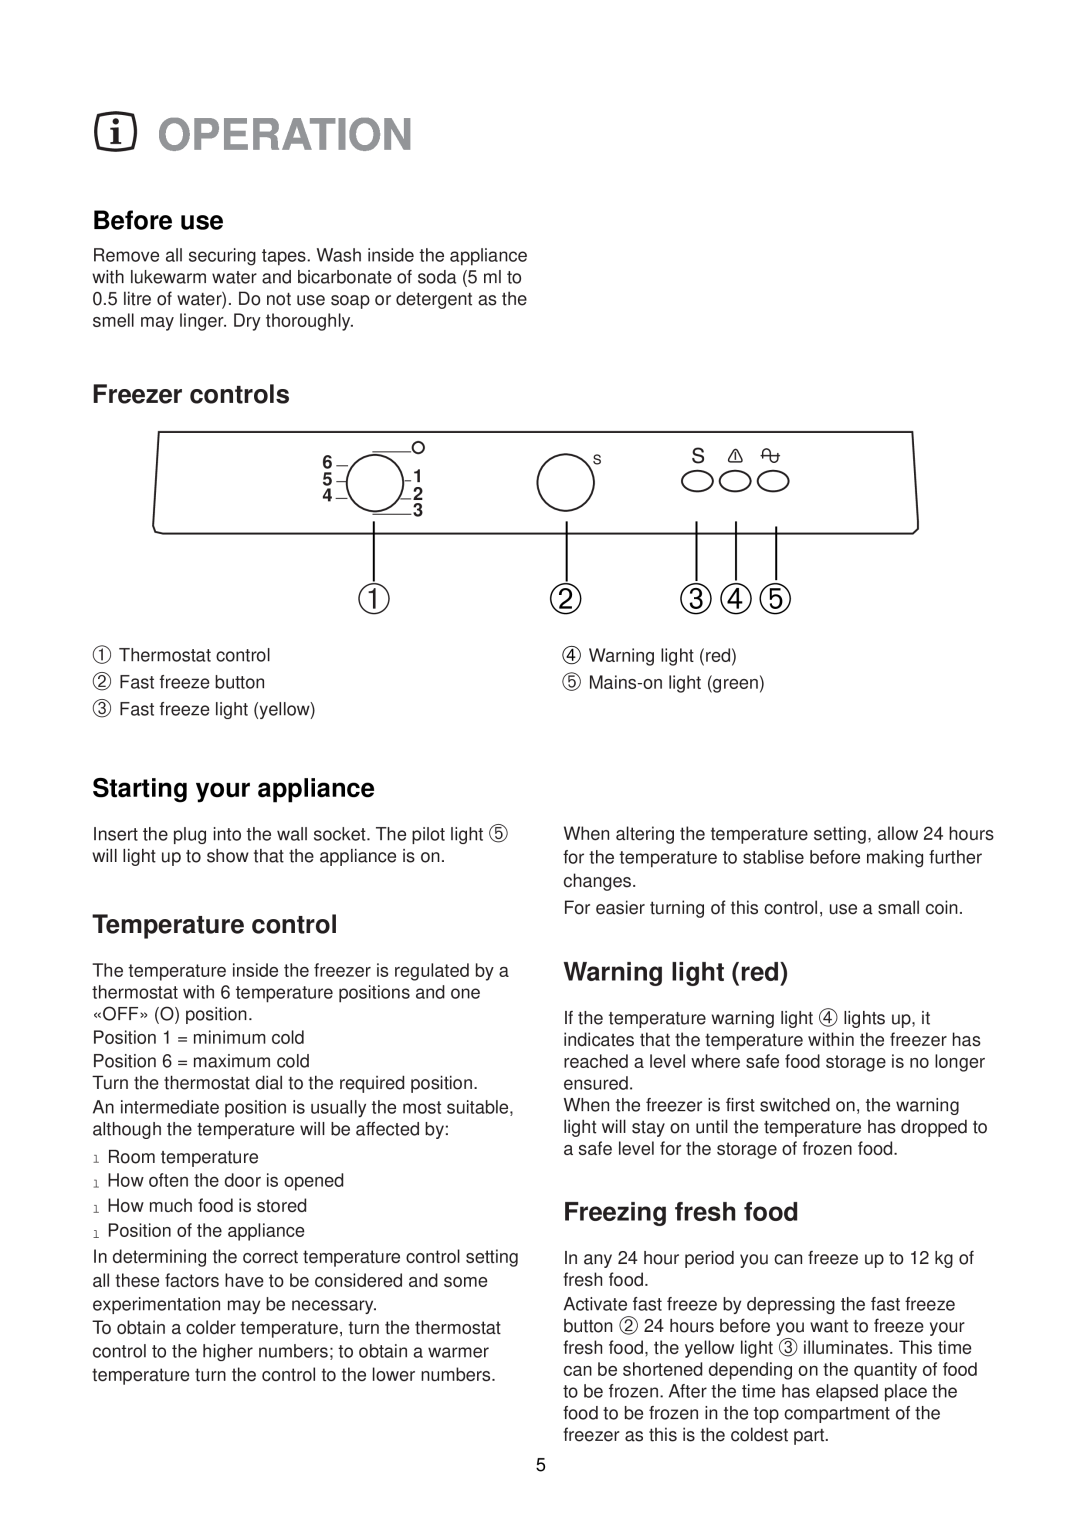 Zanussi ZF 24 W Operation, Before use, Freezer controls, Starting your appliance, Temperature control, Warning light red 